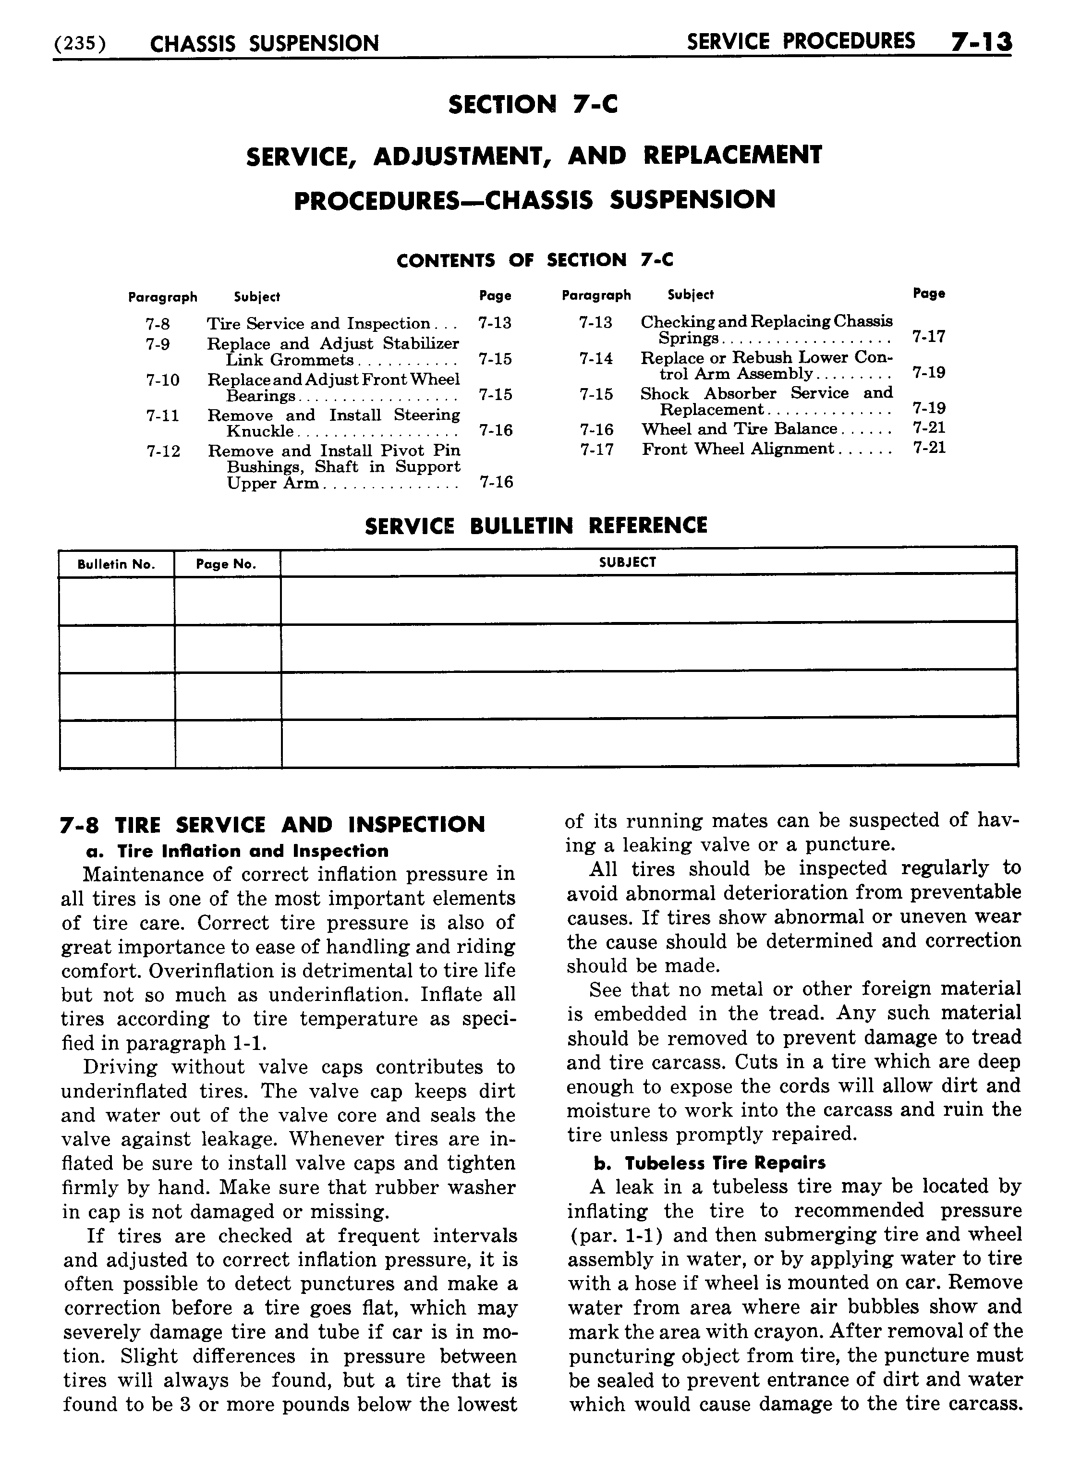 n_08 1955 Buick Shop Manual - Chassis Suspension-013-013.jpg